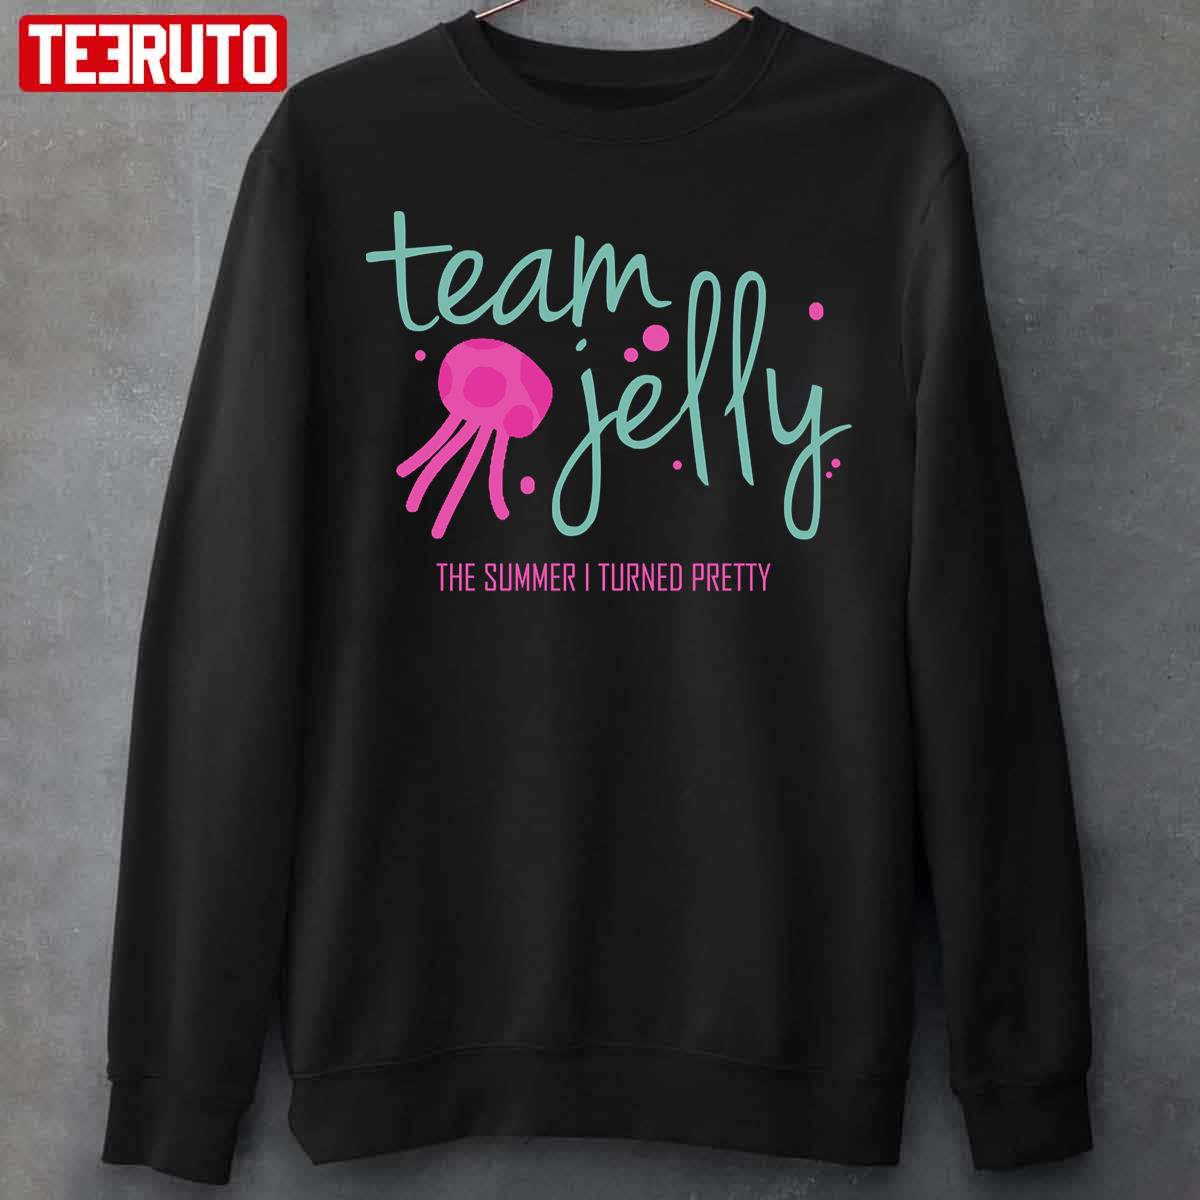 The Summer I Turned Pretty Team Jelly Unisex T-Shirt